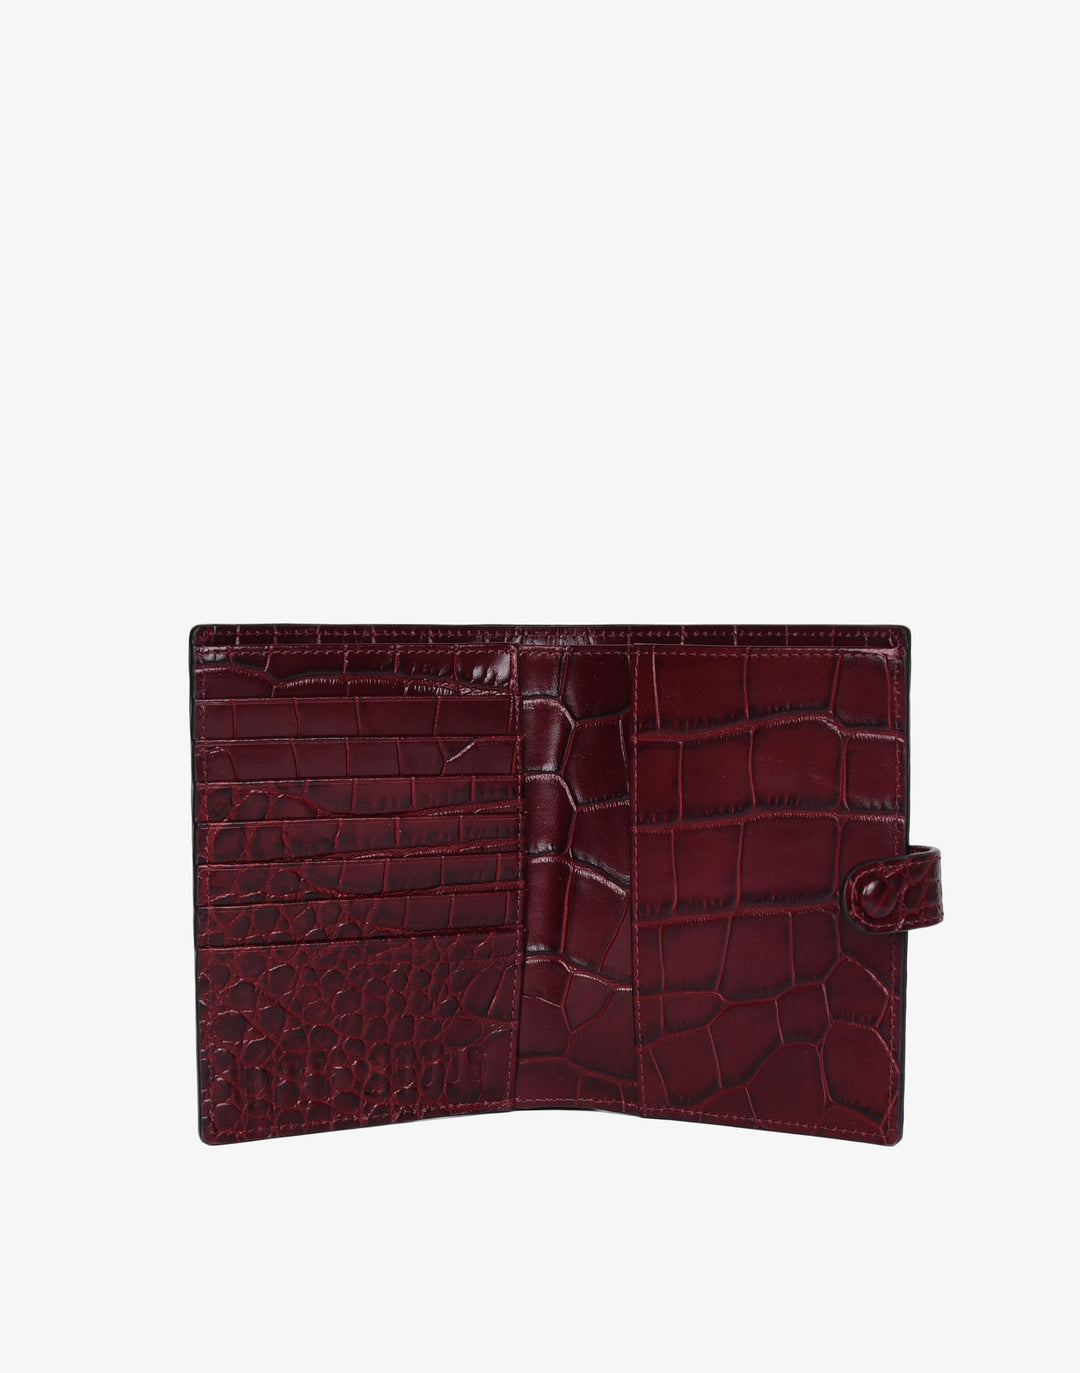 hyer goods recycled leather travel passport wallet burgundy croc#color_burgundy-croco